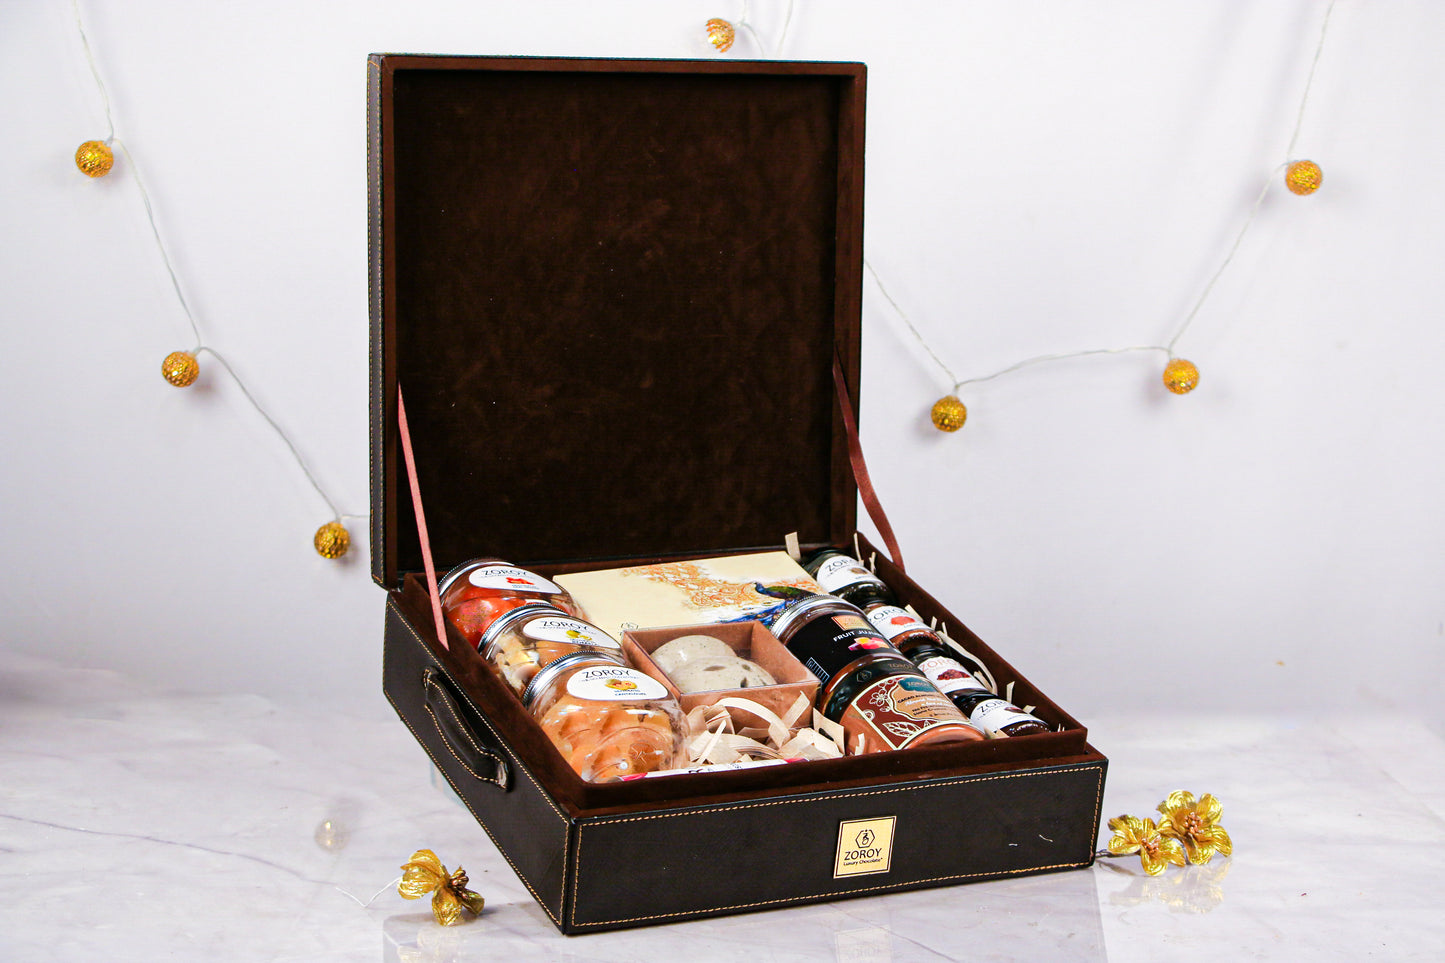 ZOROY Art Leather hamper box filled with chocolates and other goodies